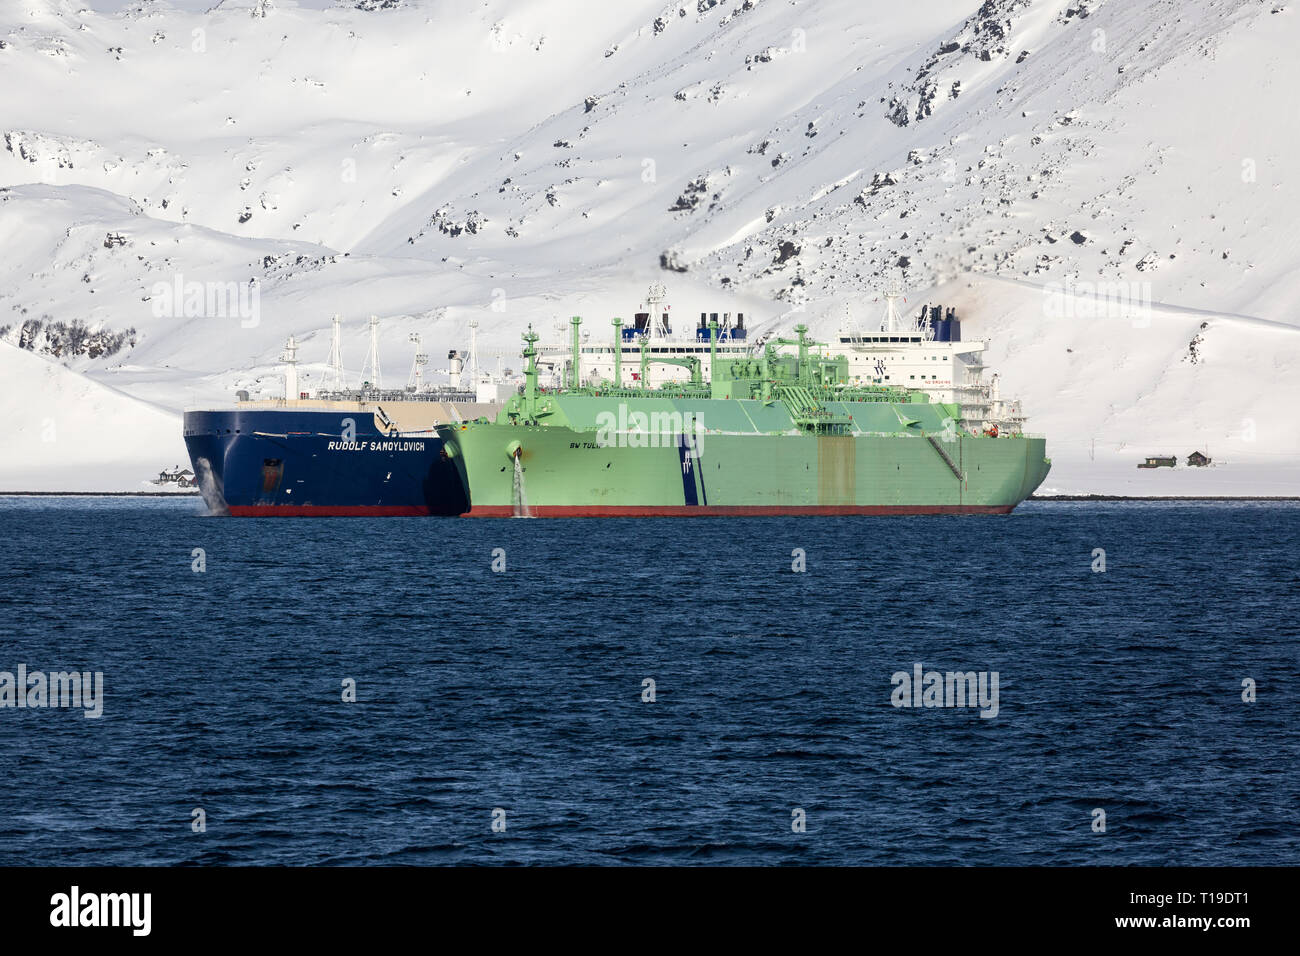 Two LNG, Liquid Natural Gas tankers, the BW Tulip and the Rudolf Samoylovich, awaiting their next cargo, anchored in the Norwegian Fjords. Stock Photo